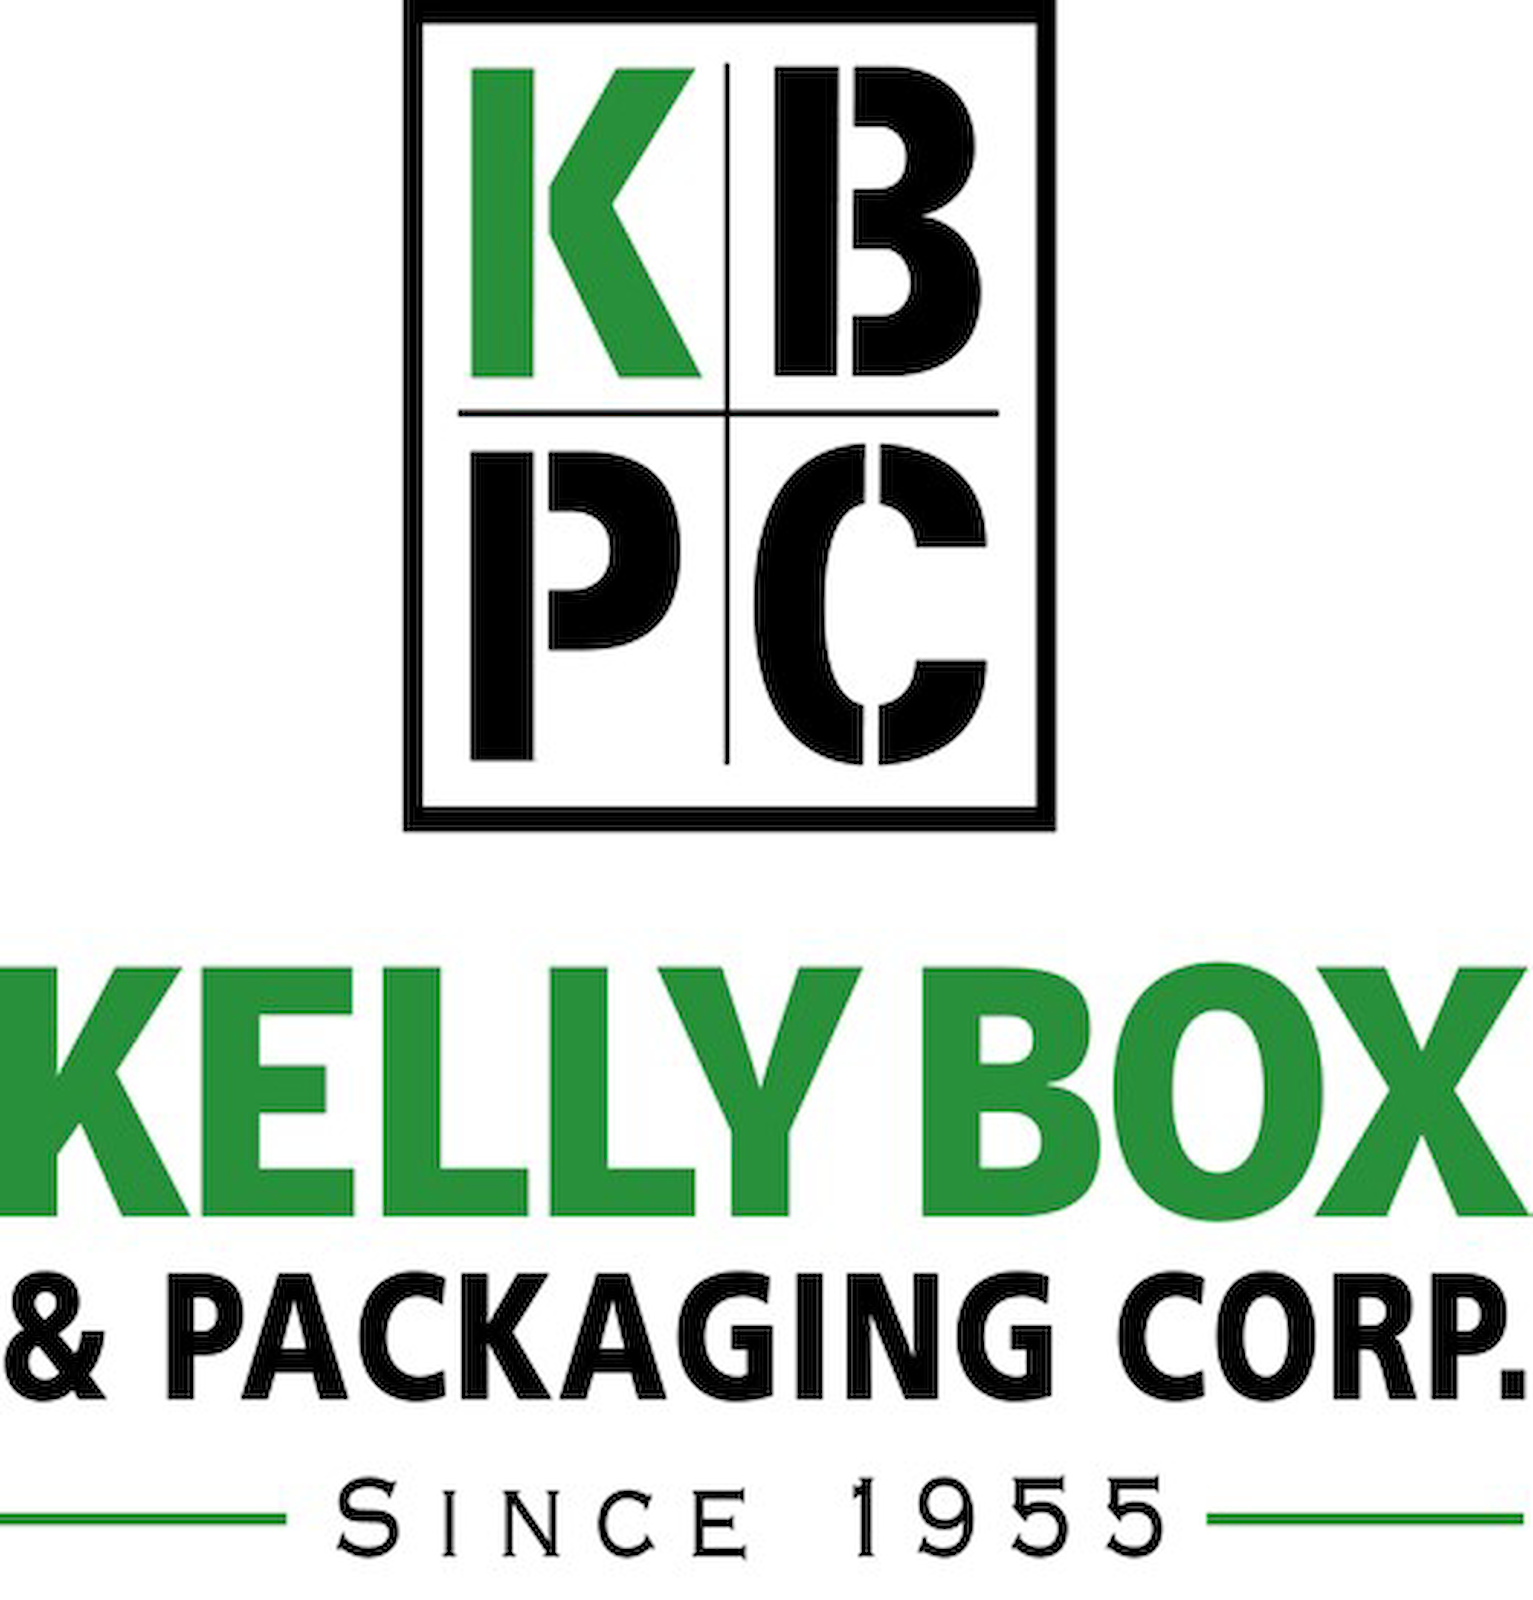 KELLY BOX & PACKAGING CORP.